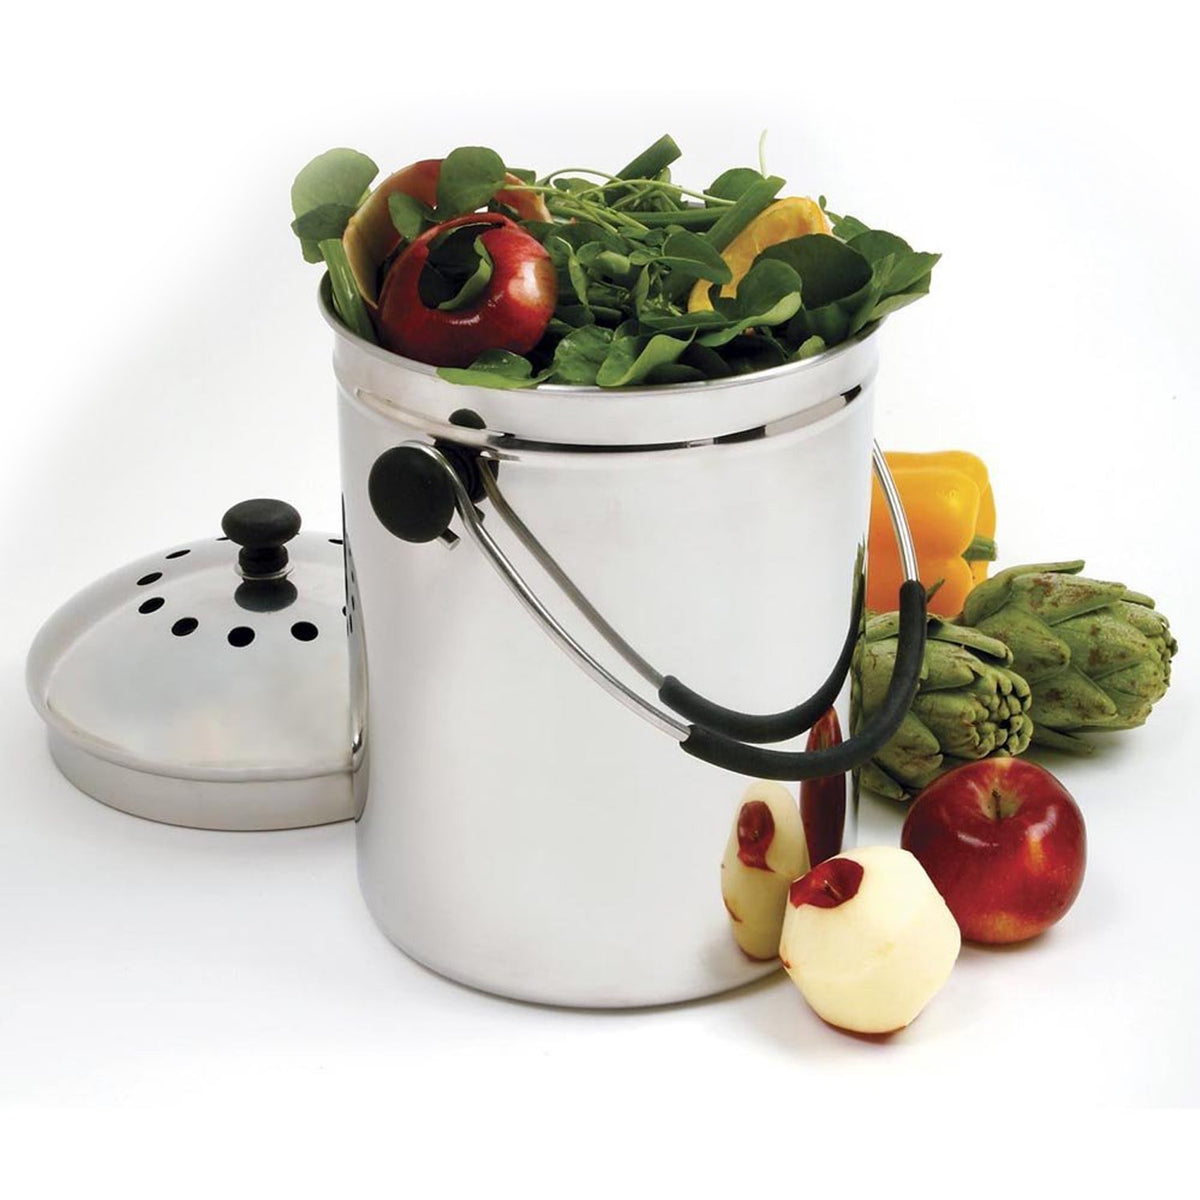 Norpro 95 GRIP-EZ Counter Top Compost Keeper, Stainless Steel